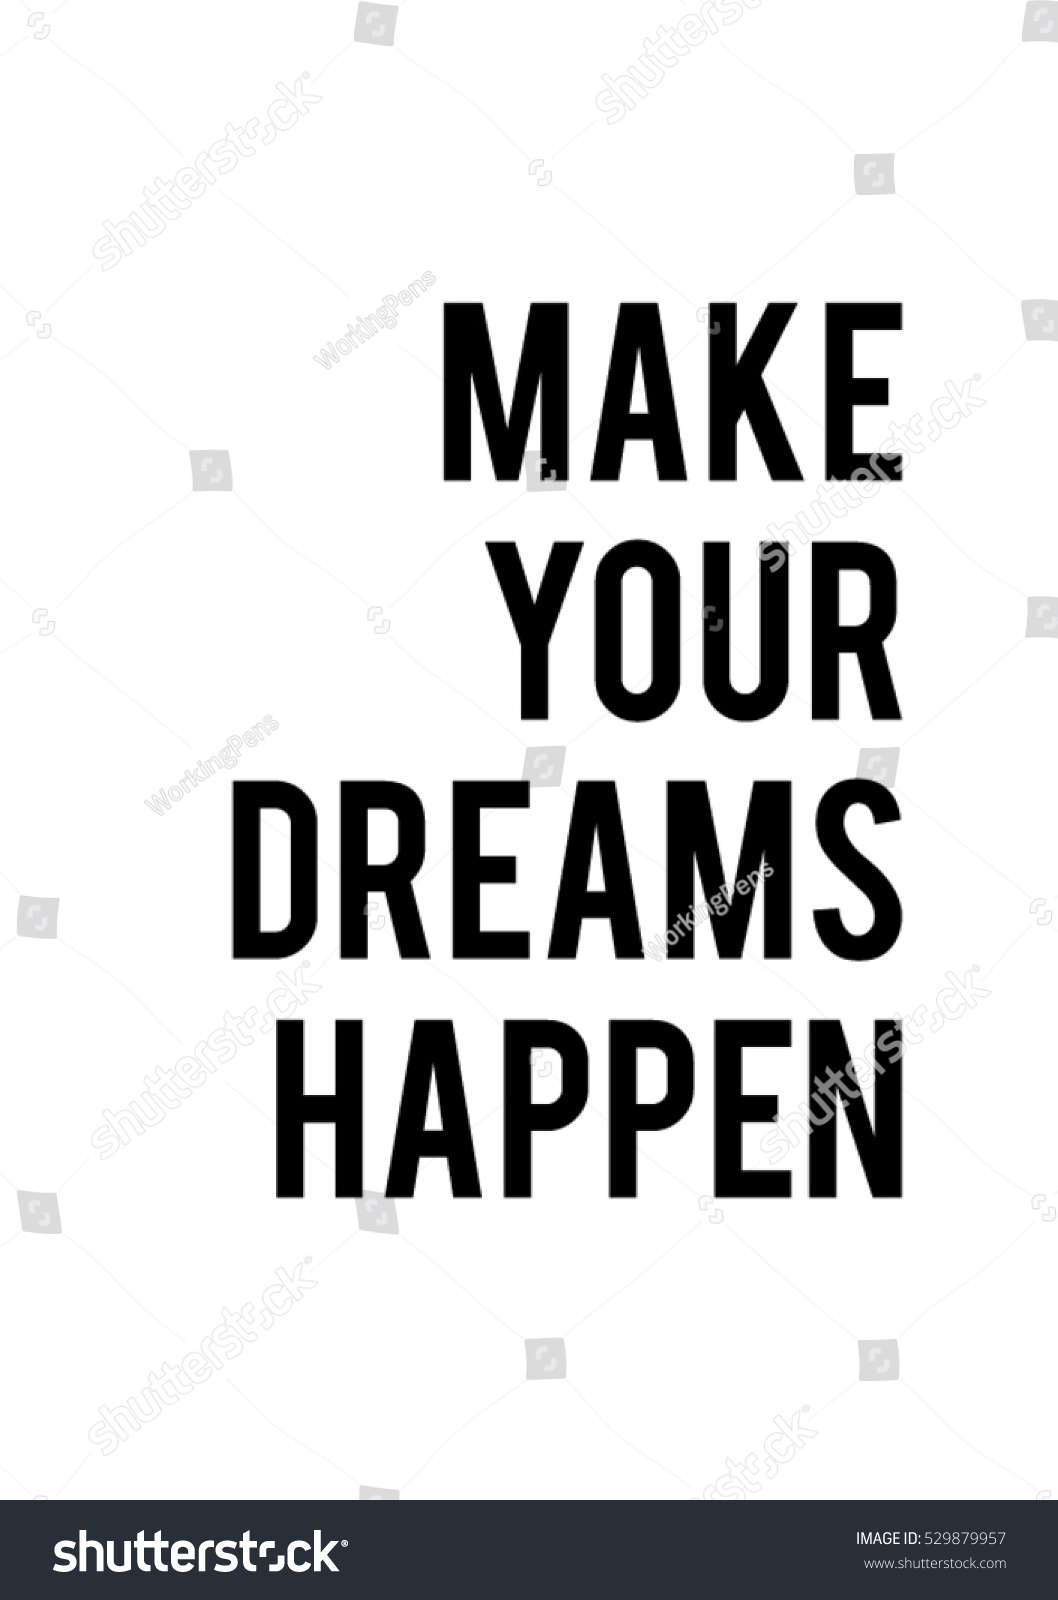 Make your dreams happen quote print in vector Lettering quotes motivation for life and happiness